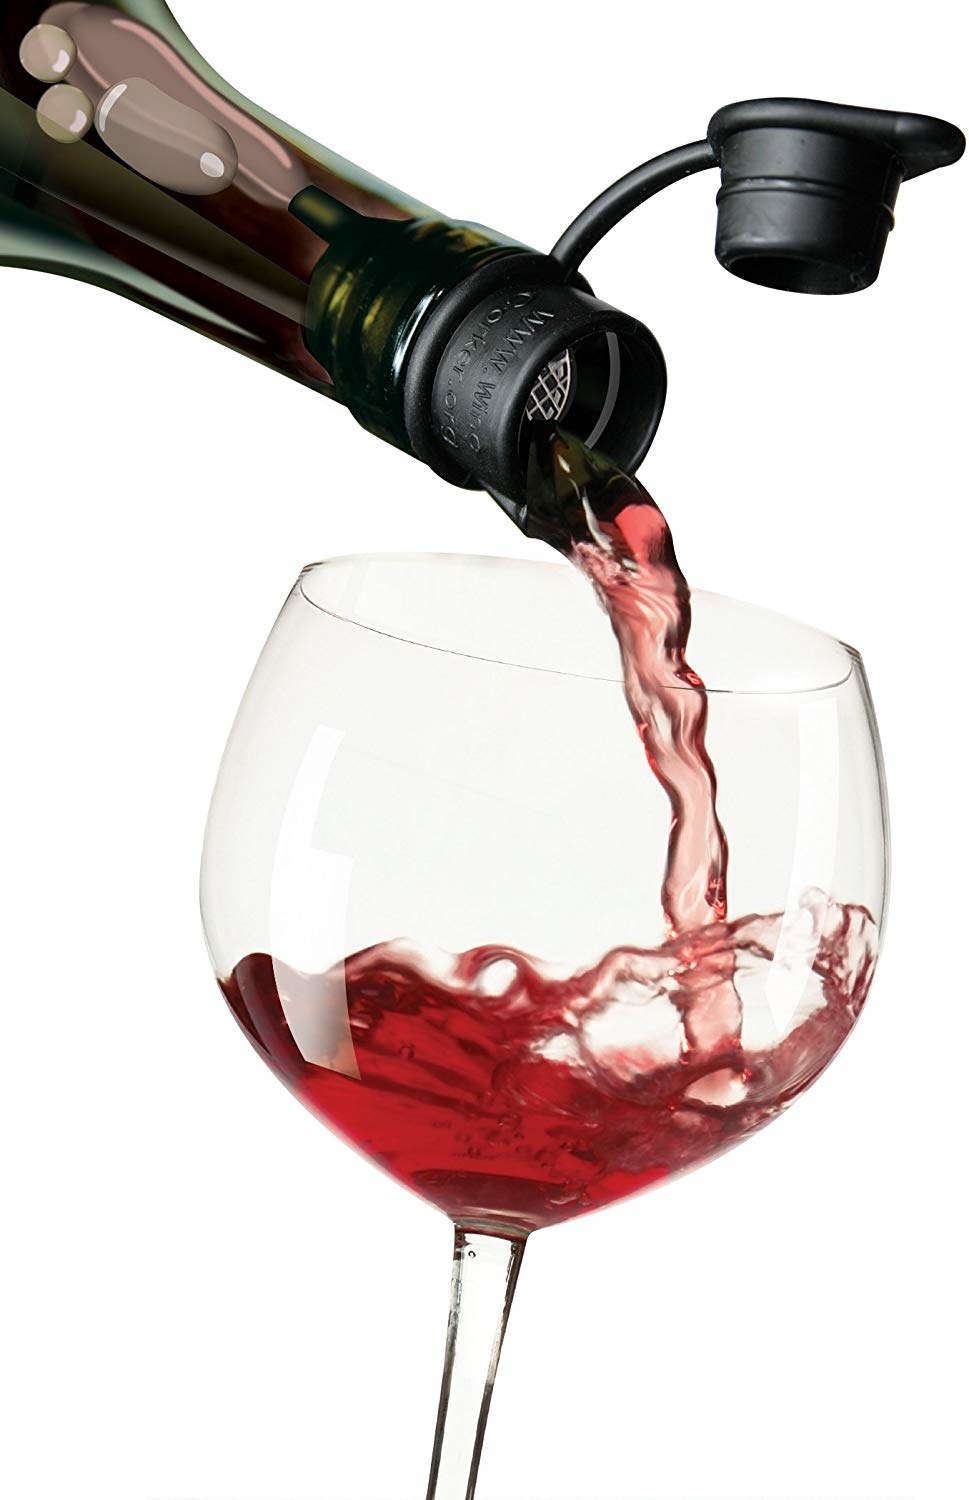 Wine being poured out of a bottle through the aerating stopper into a glass